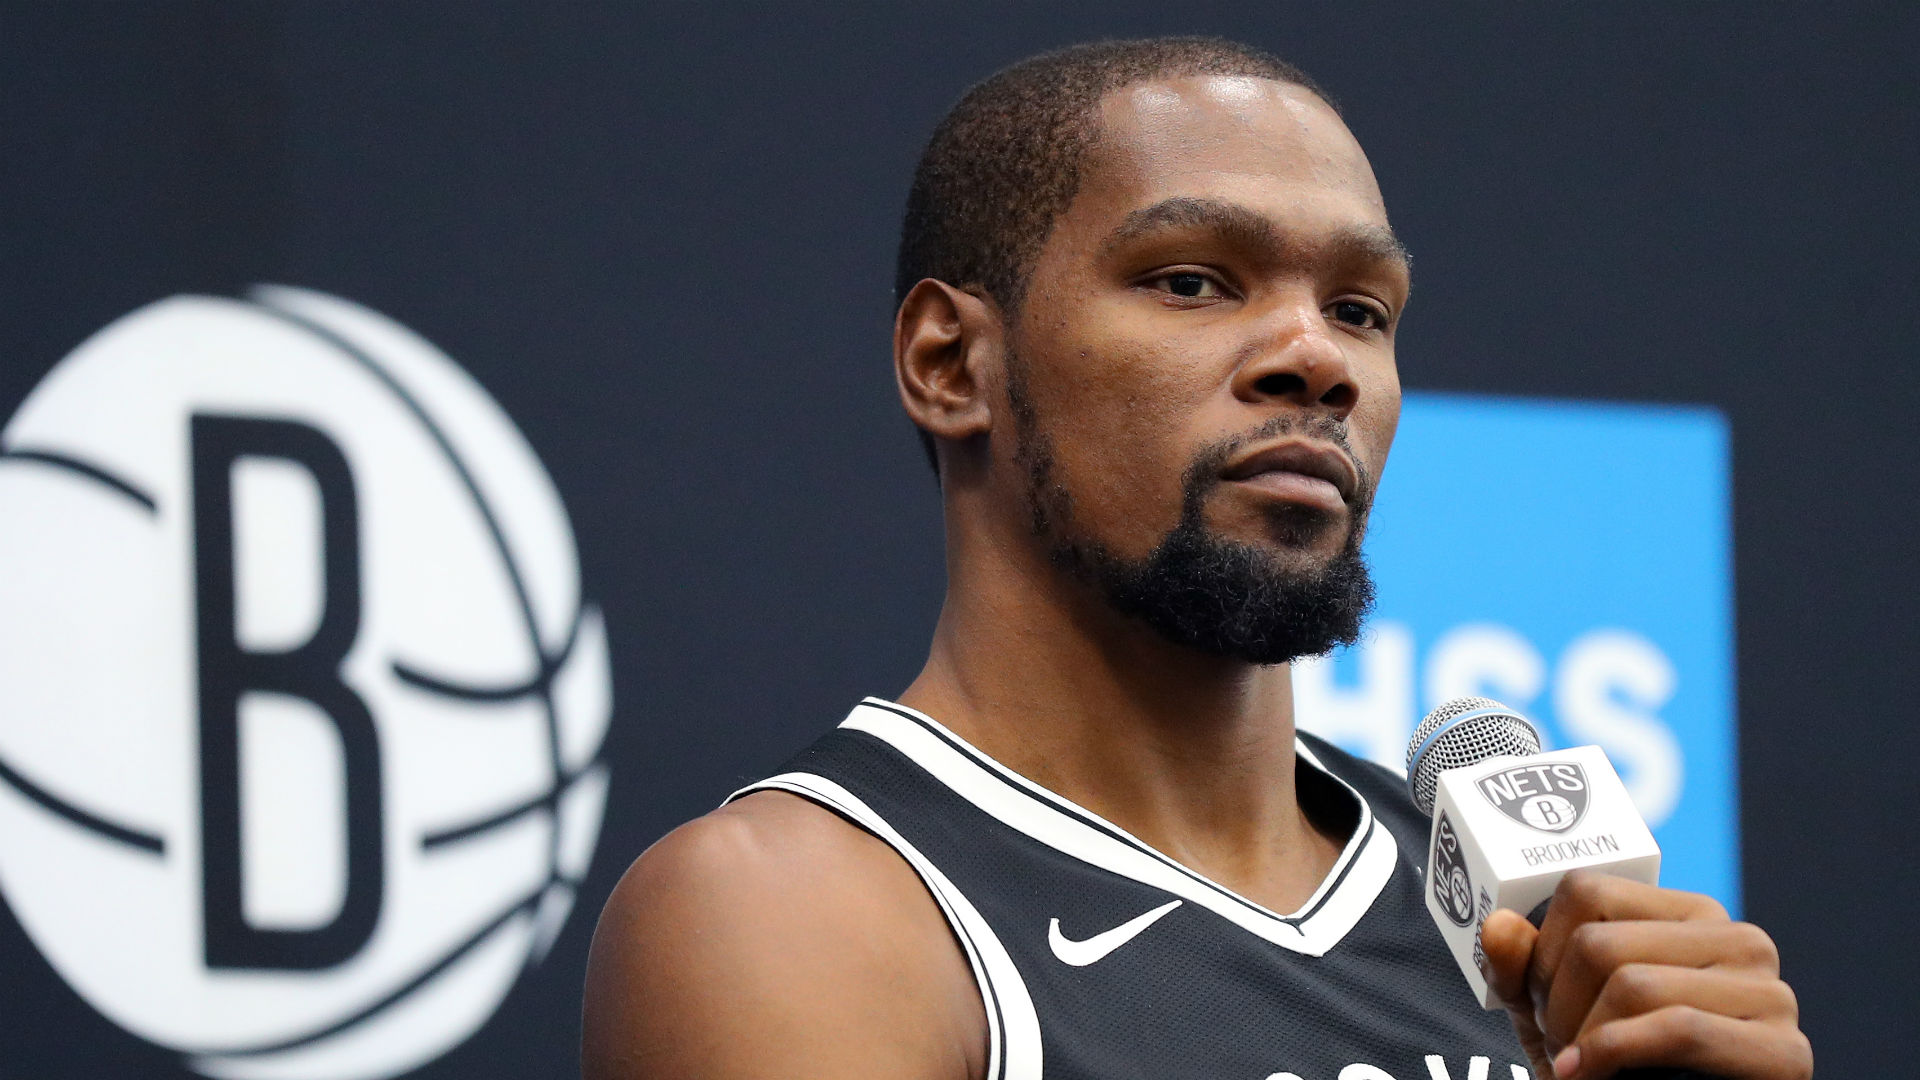 After signing for the Brooklyn Nets in free agency, Kevin Durant said: "The cool thing right now is not the Knicks."